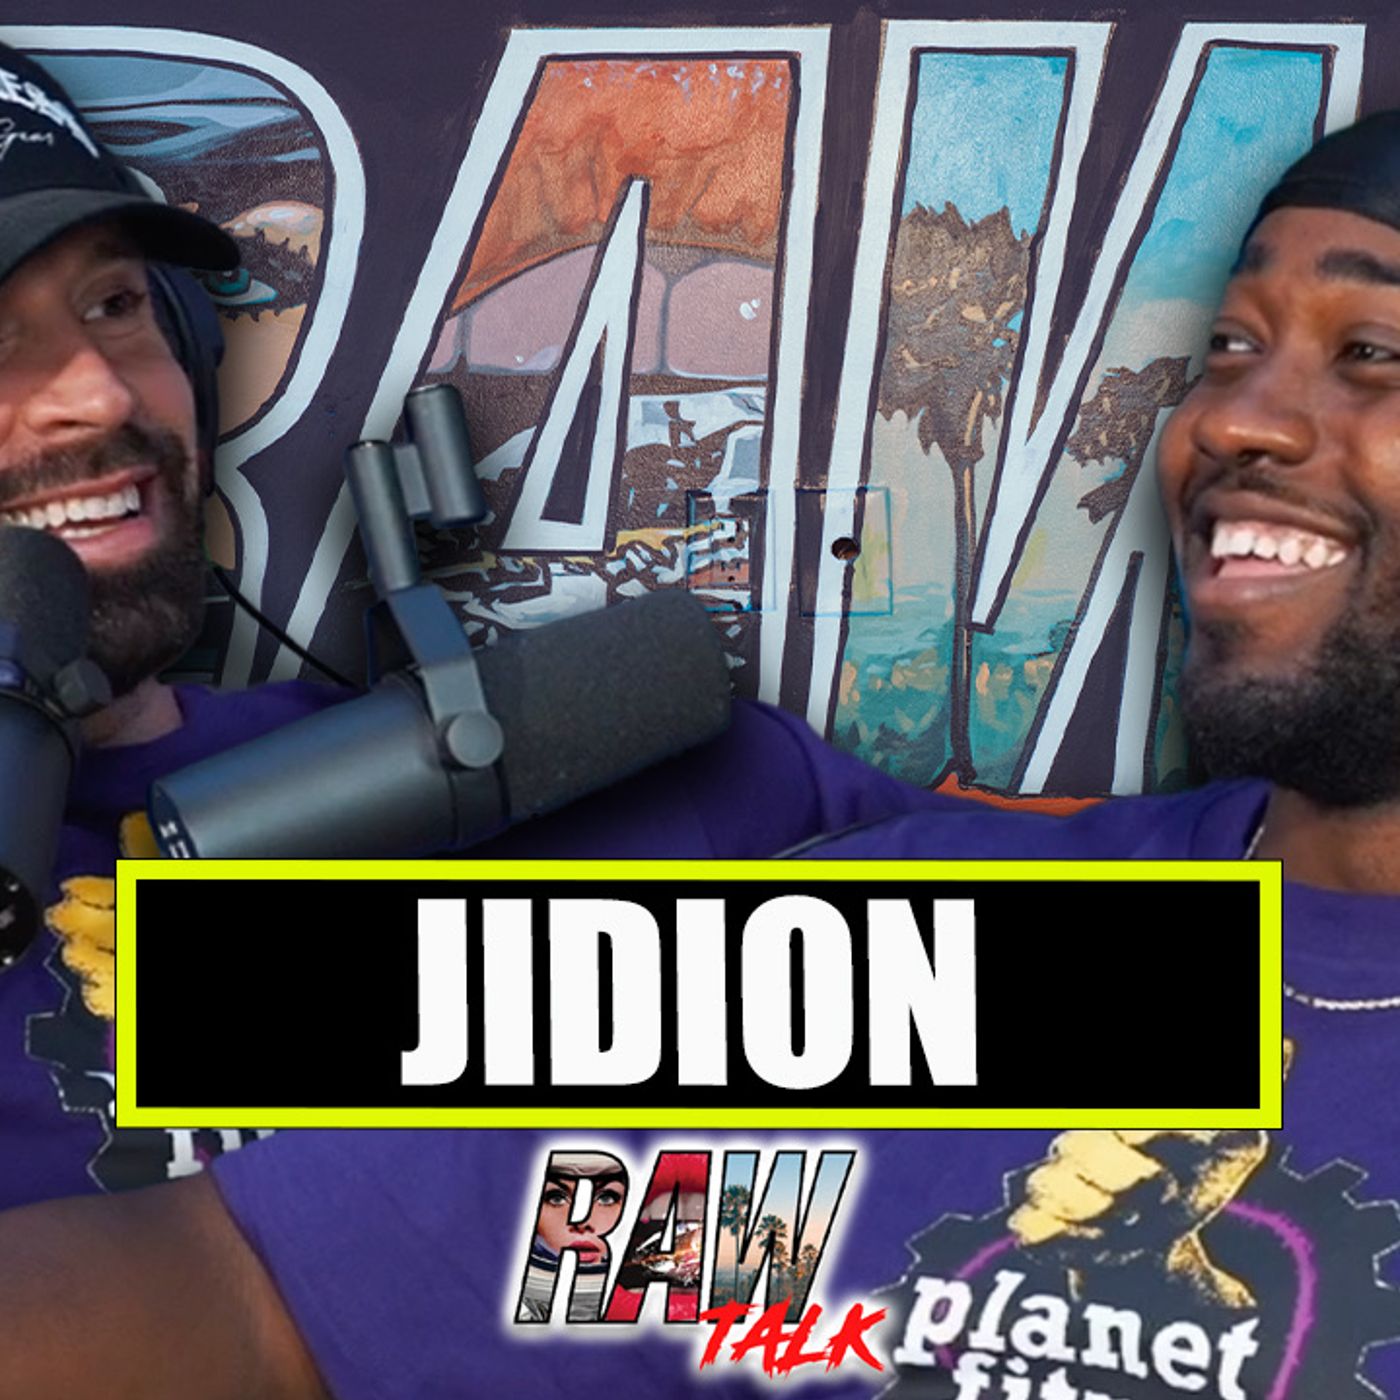 JIDION ON GETTING EVICTED, MISSING SIDEMEN EVENT & GETTING BANNED FROM TWITCH